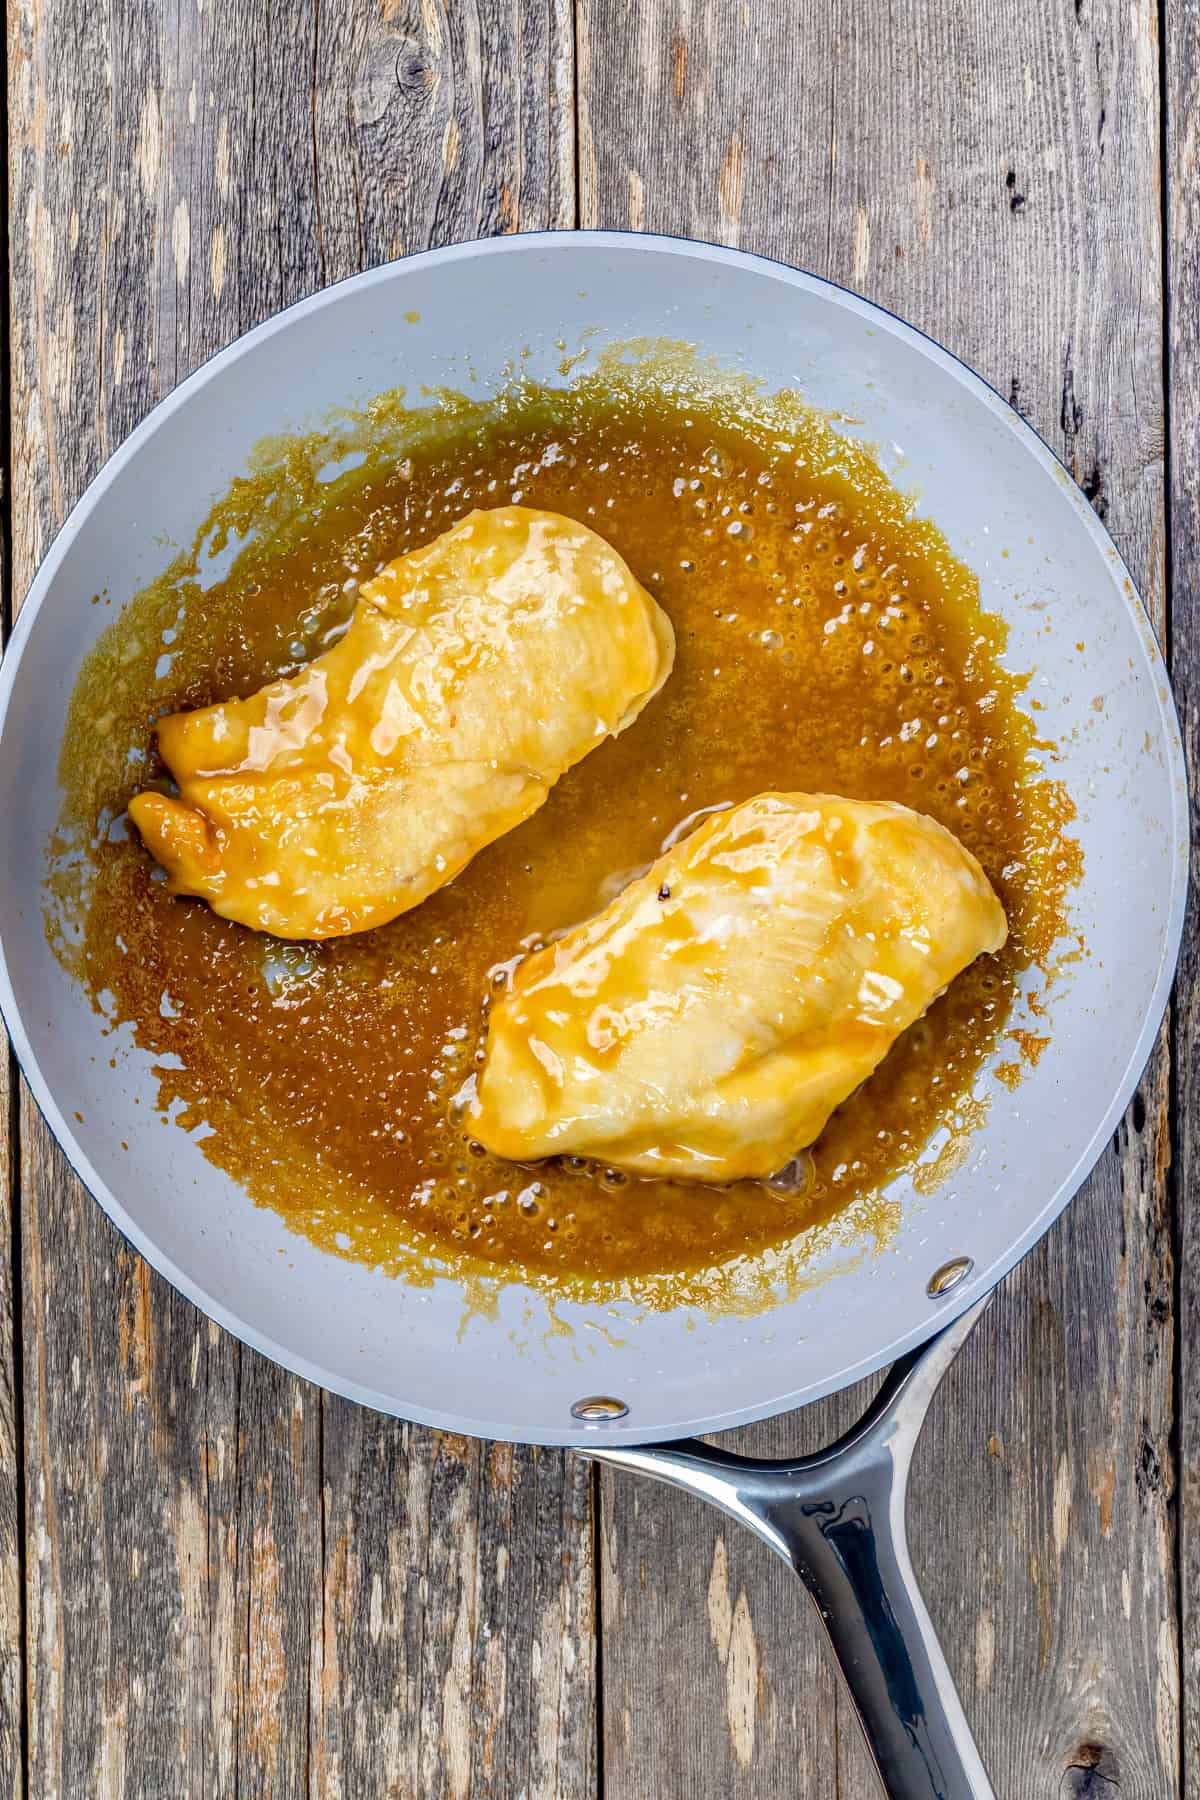 Chicken breasts cooking in a skillet.